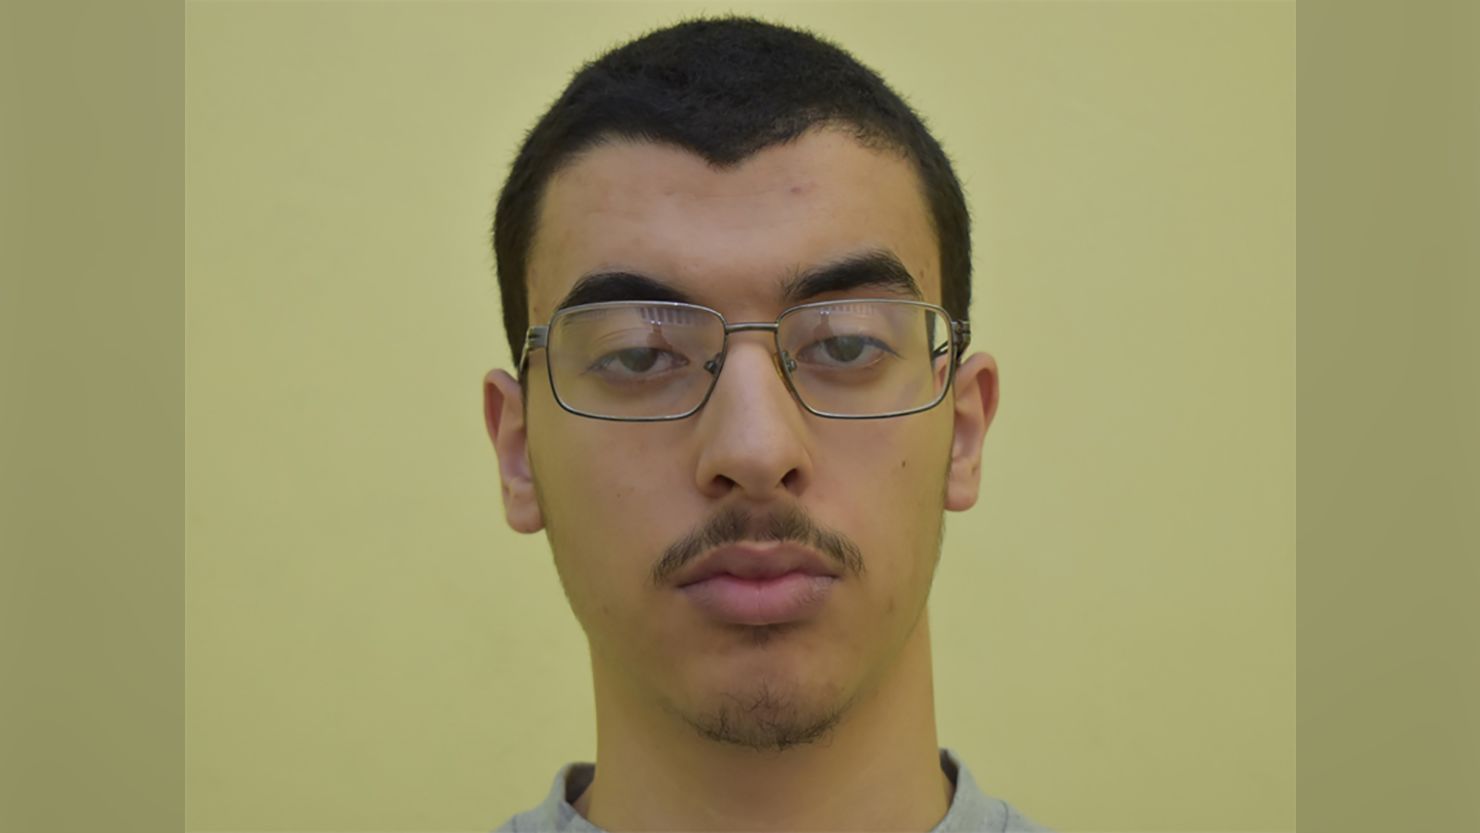 Hashem Abedi, 22, was in Libya at the time of the Manchester Arena bombing, but the Old Bailey heard that he had helped his brother Salman plan the attack.